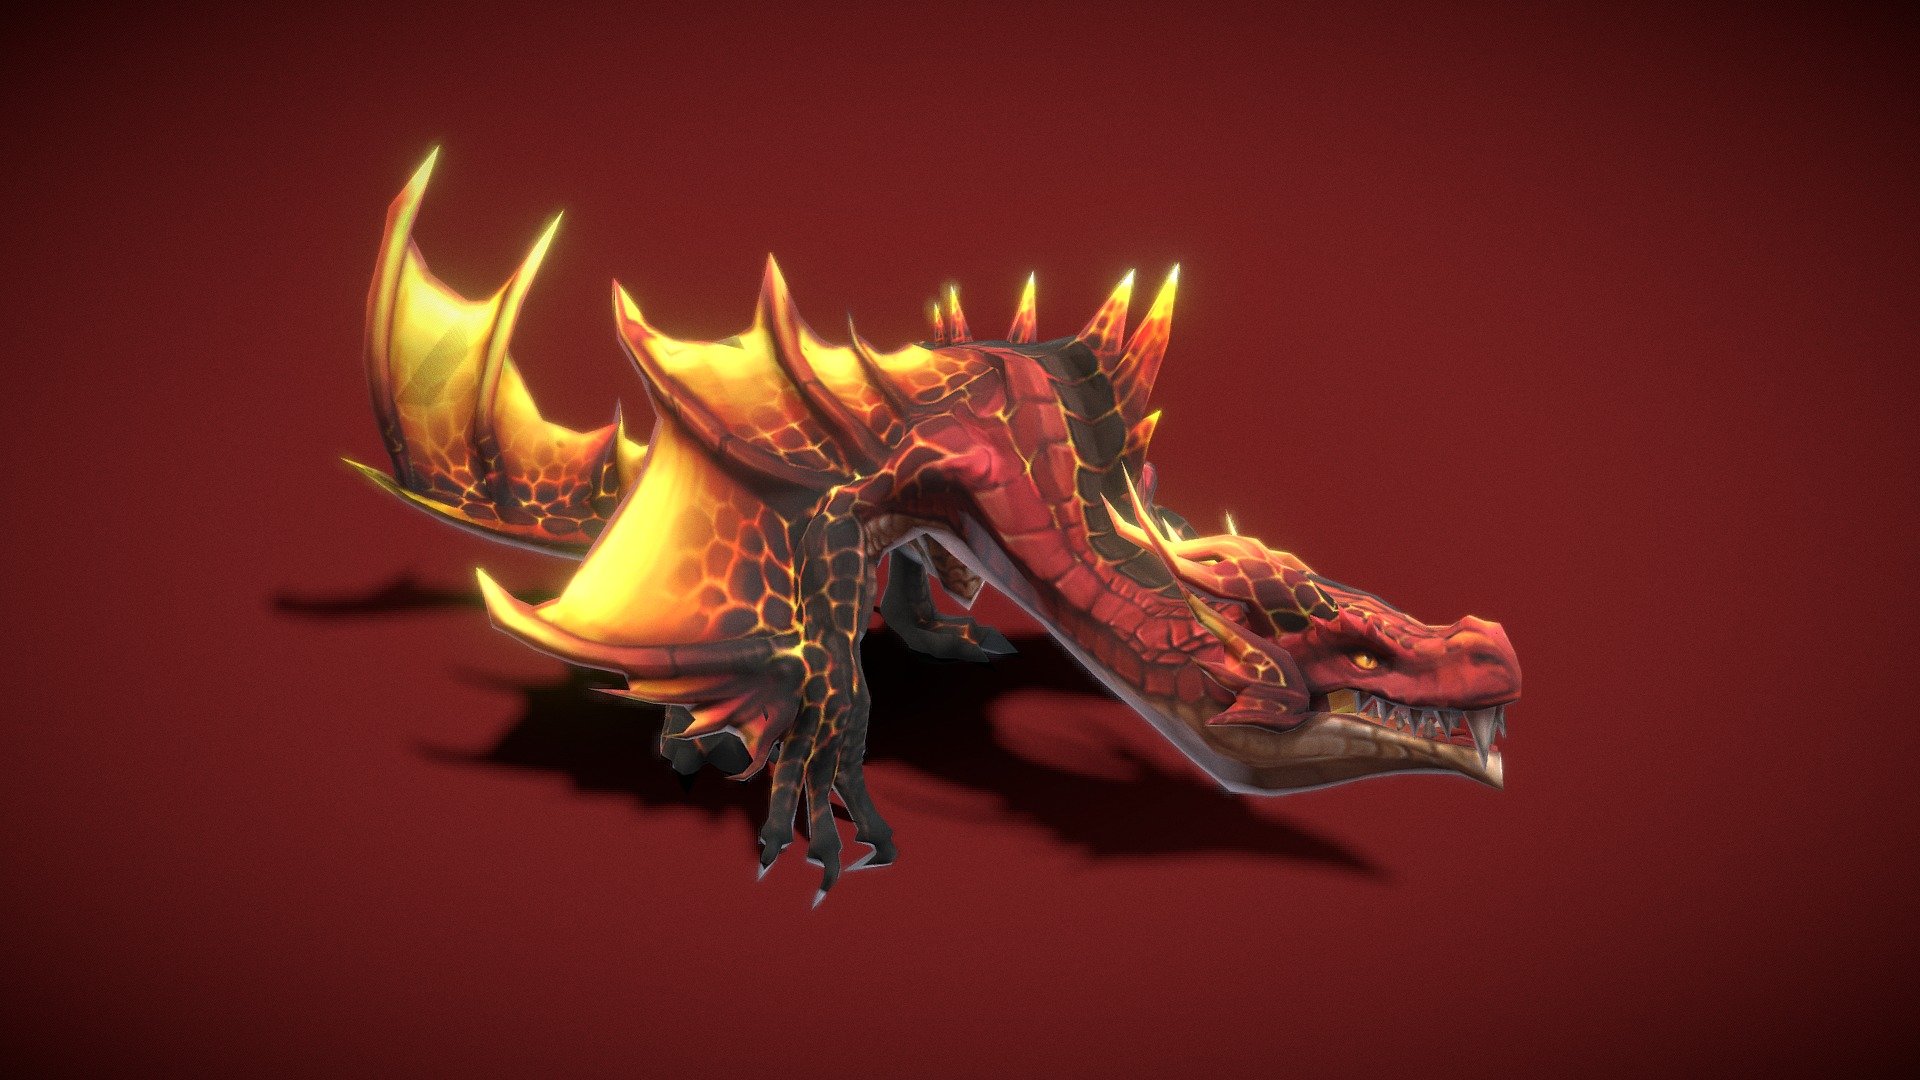 Verts: 4282
Tris: 5730
Texture: 512X512 X 1

Animation List :
Animation type_Generic (Not Humanoid)
idle, walk, attack, active, passive, dead - Fantasy Chess RPG Character - Smaug - 3D model by momomo (@F-unit) 3d model